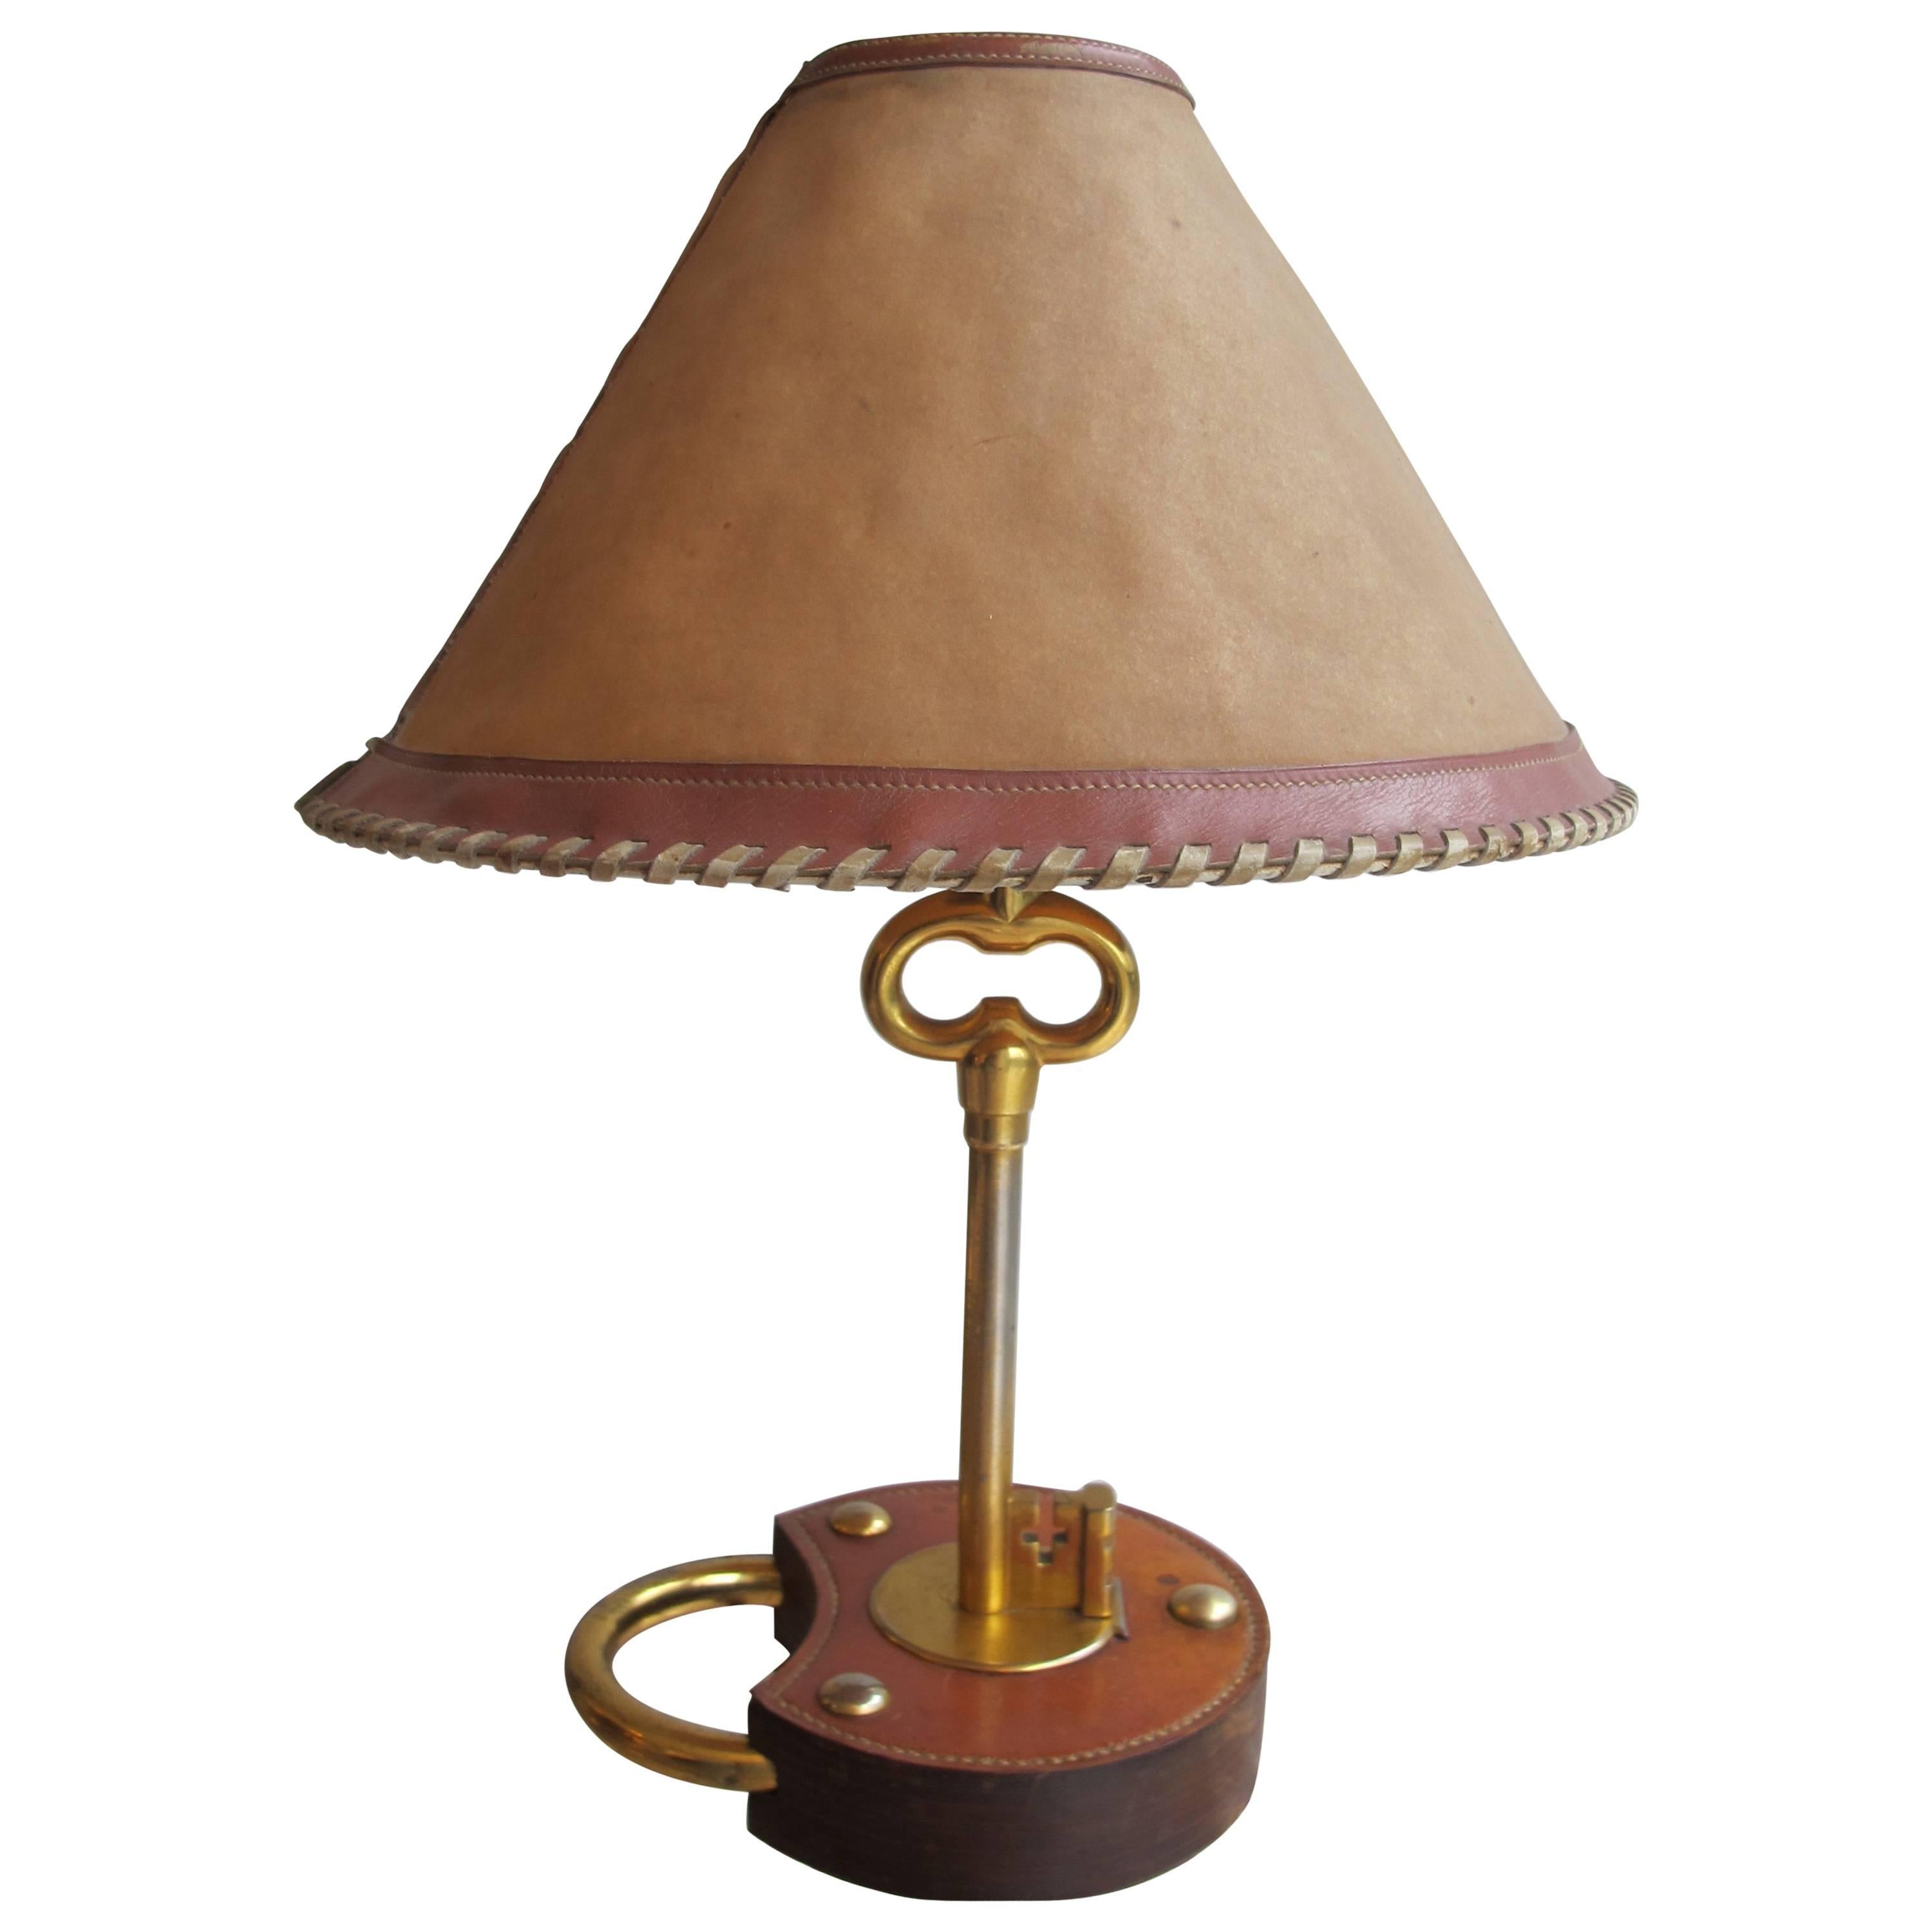 Rare 1950s Lock and Key Table Lamp by Hermes For Sale